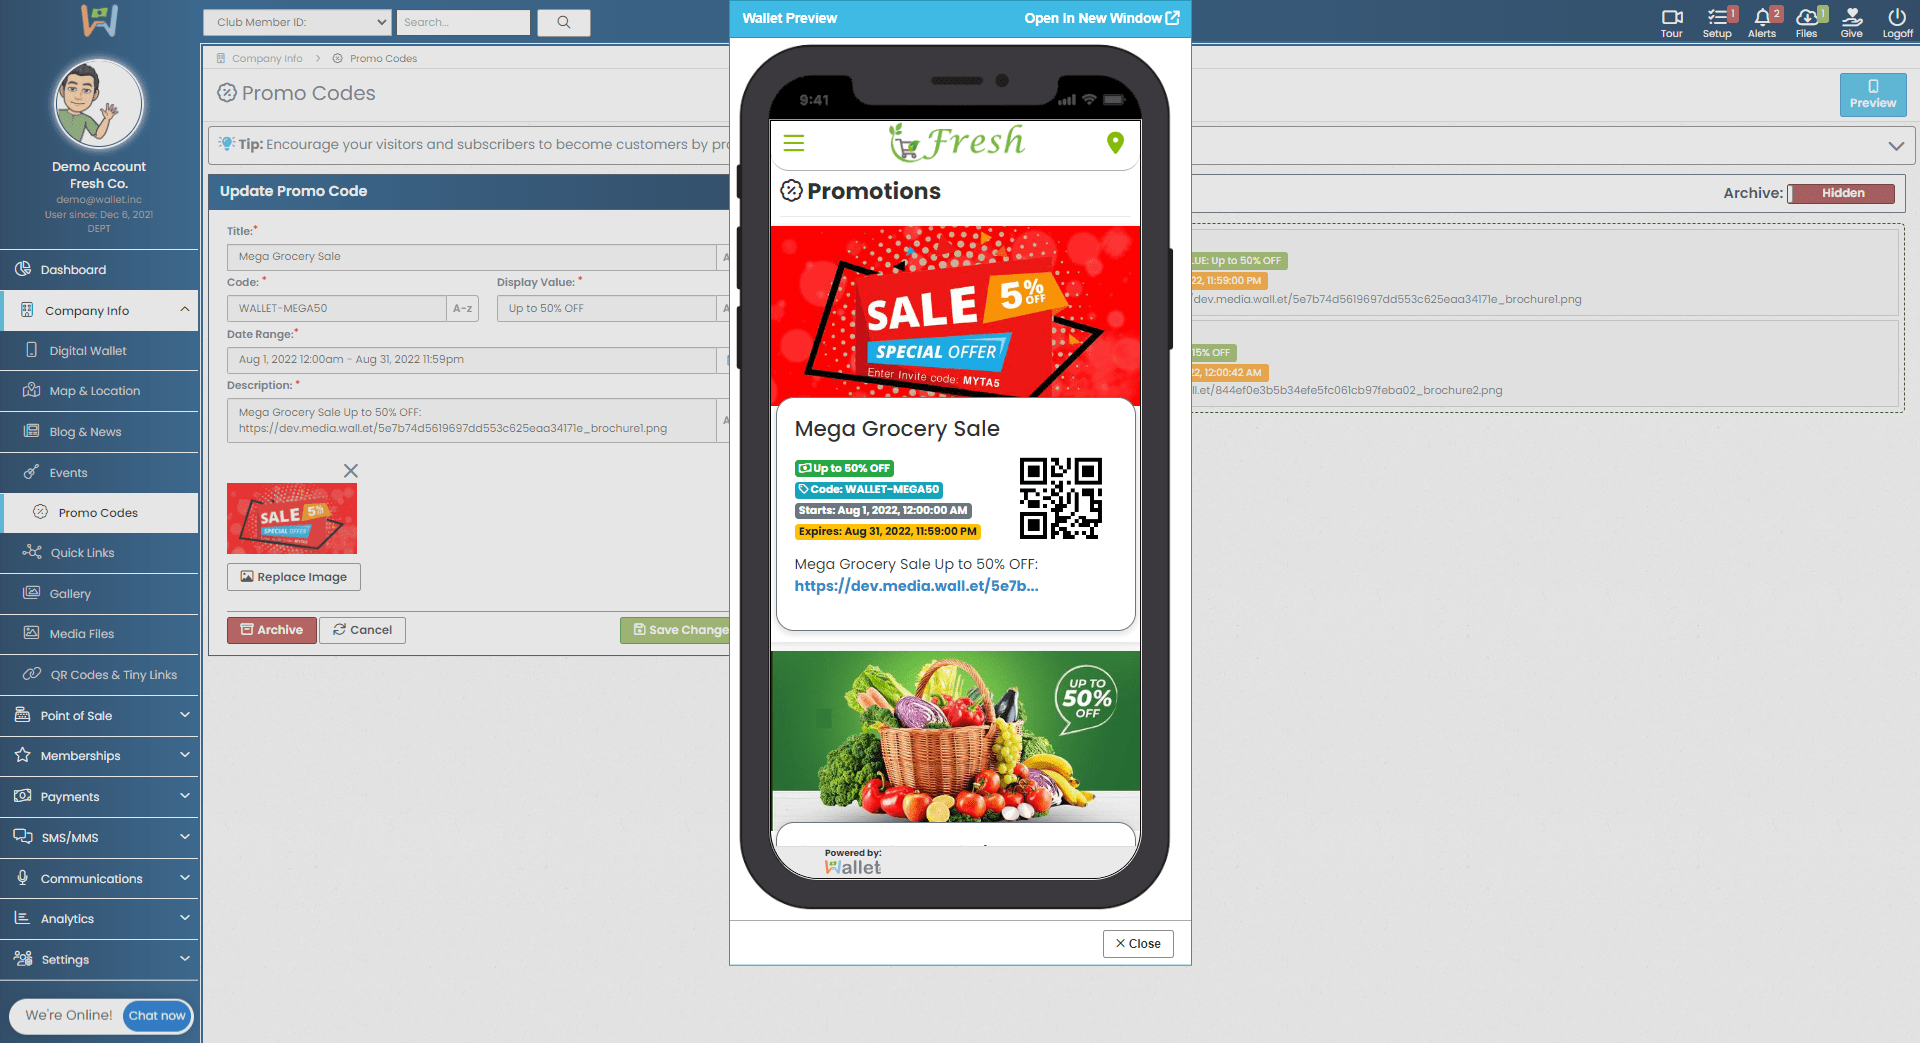 See exactly what your customers will see in the Promo Codes area of your Wallet